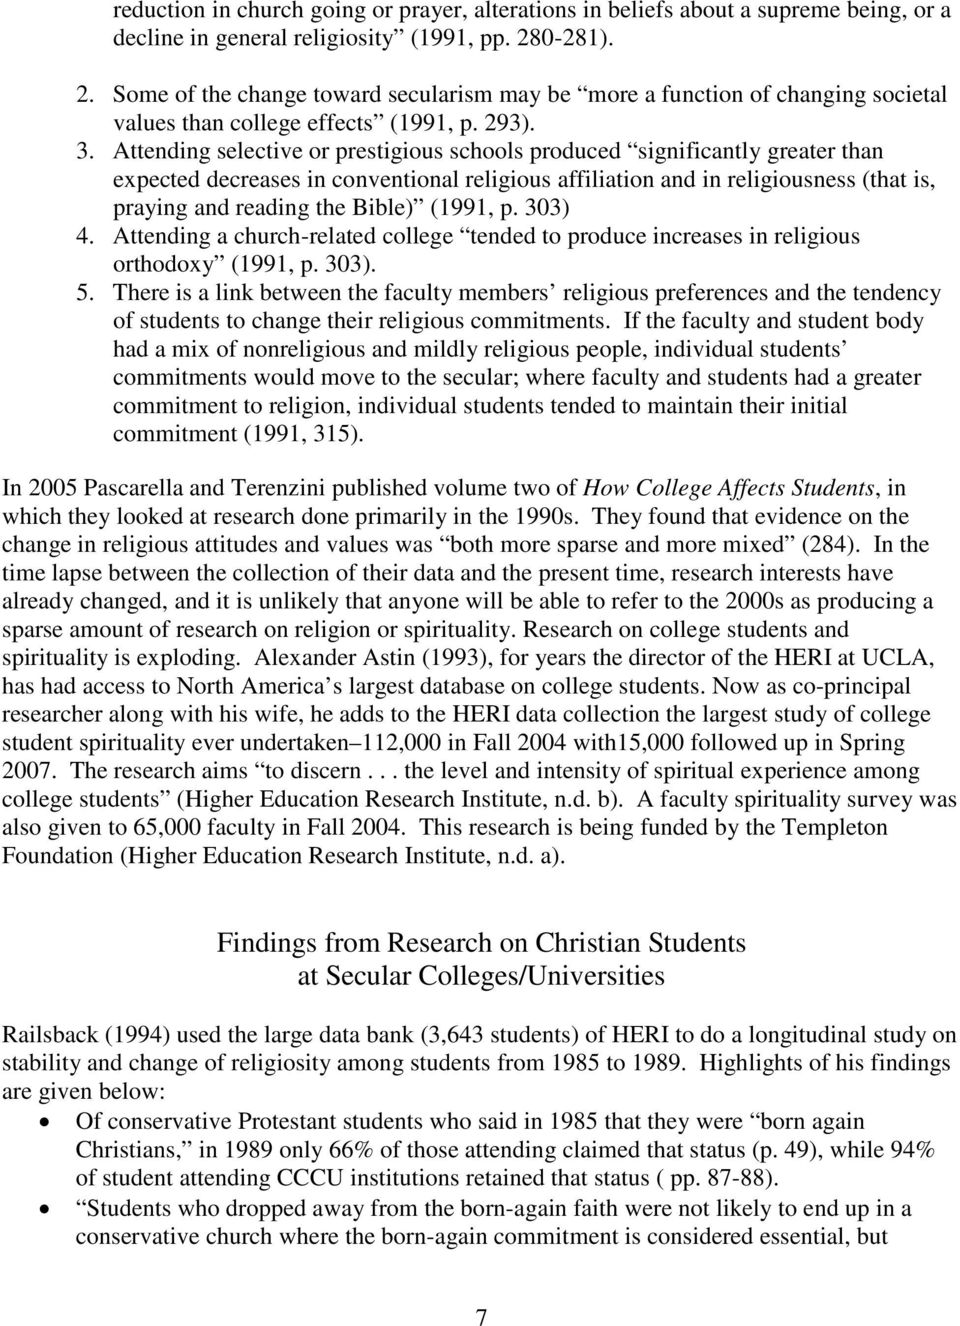 Attending selective or prestigious schools produced significantly greater than expected decreases in conventional religious affiliation and in religiousness (that is, praying and reading the Bible)